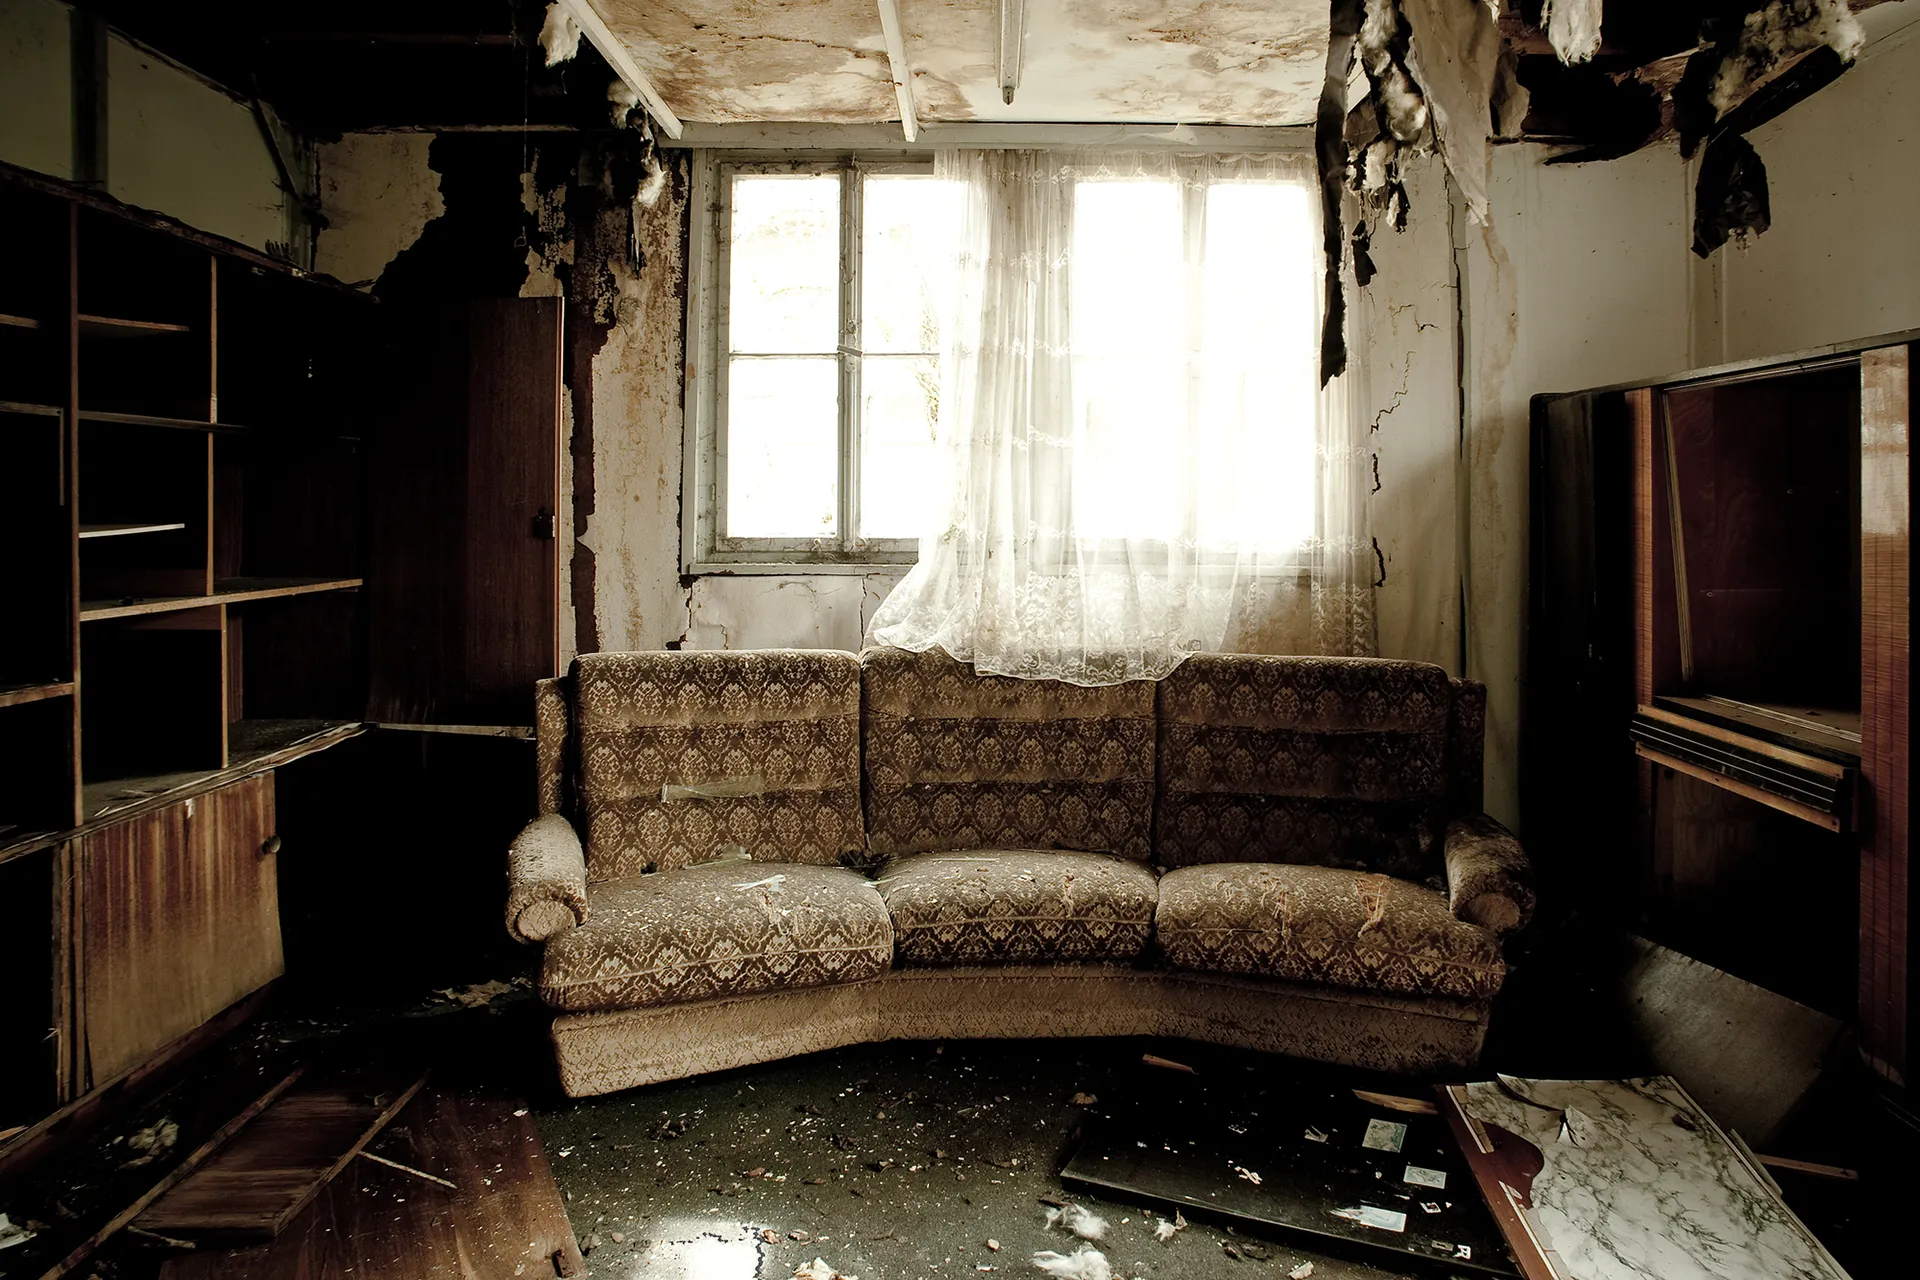 A family's living room after a devastating fire, now being restored by a professional property restoration company. The team is dedicated to bringing the property back to its pre-fire state